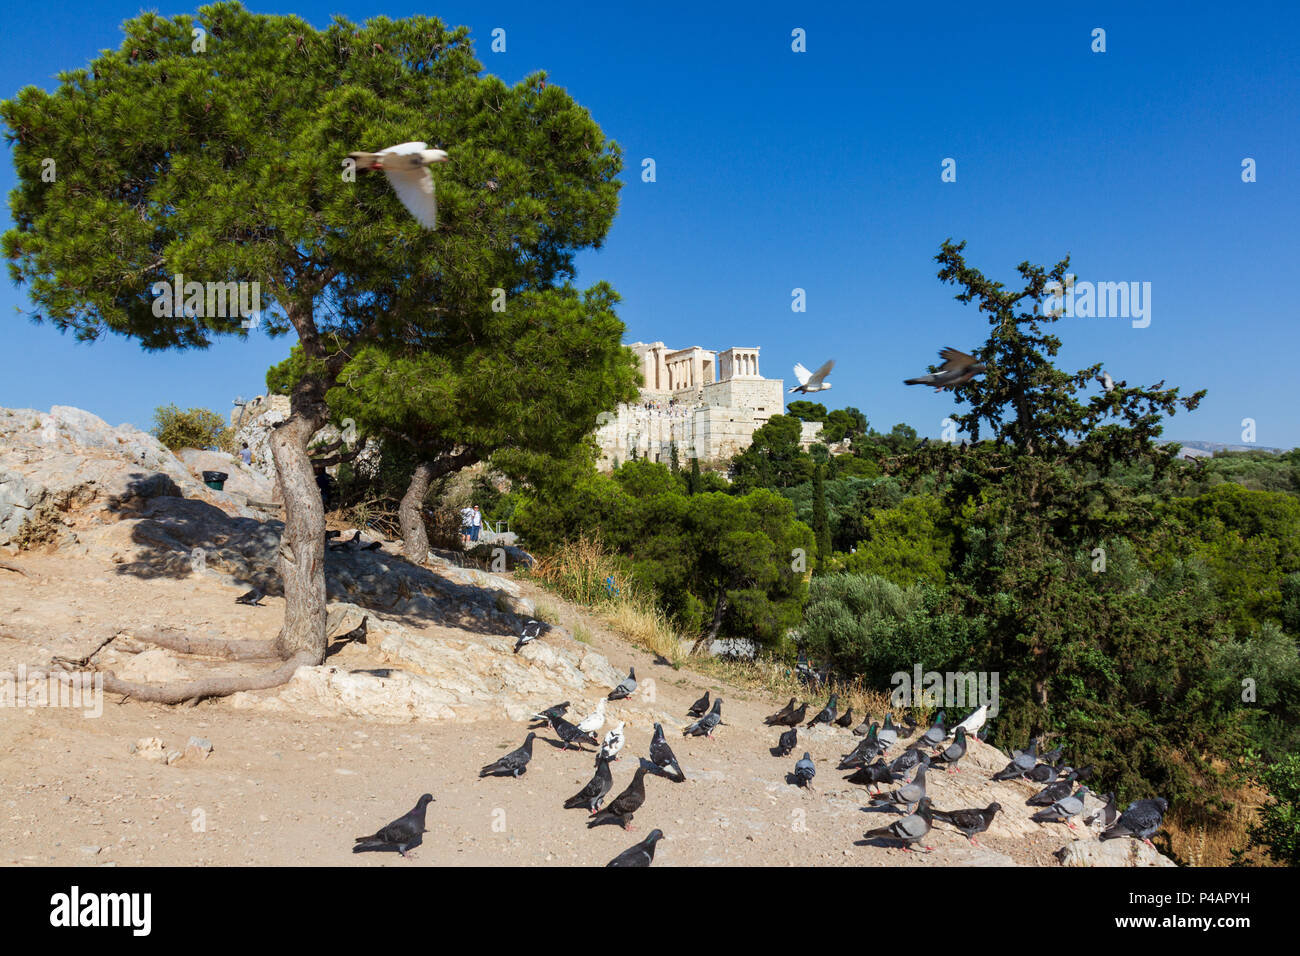 Athens, Greece - June 9, 2018: Scenic view of the rock of the Acropolis of Athens in Greece with pigeons in the foreground Stock Photo